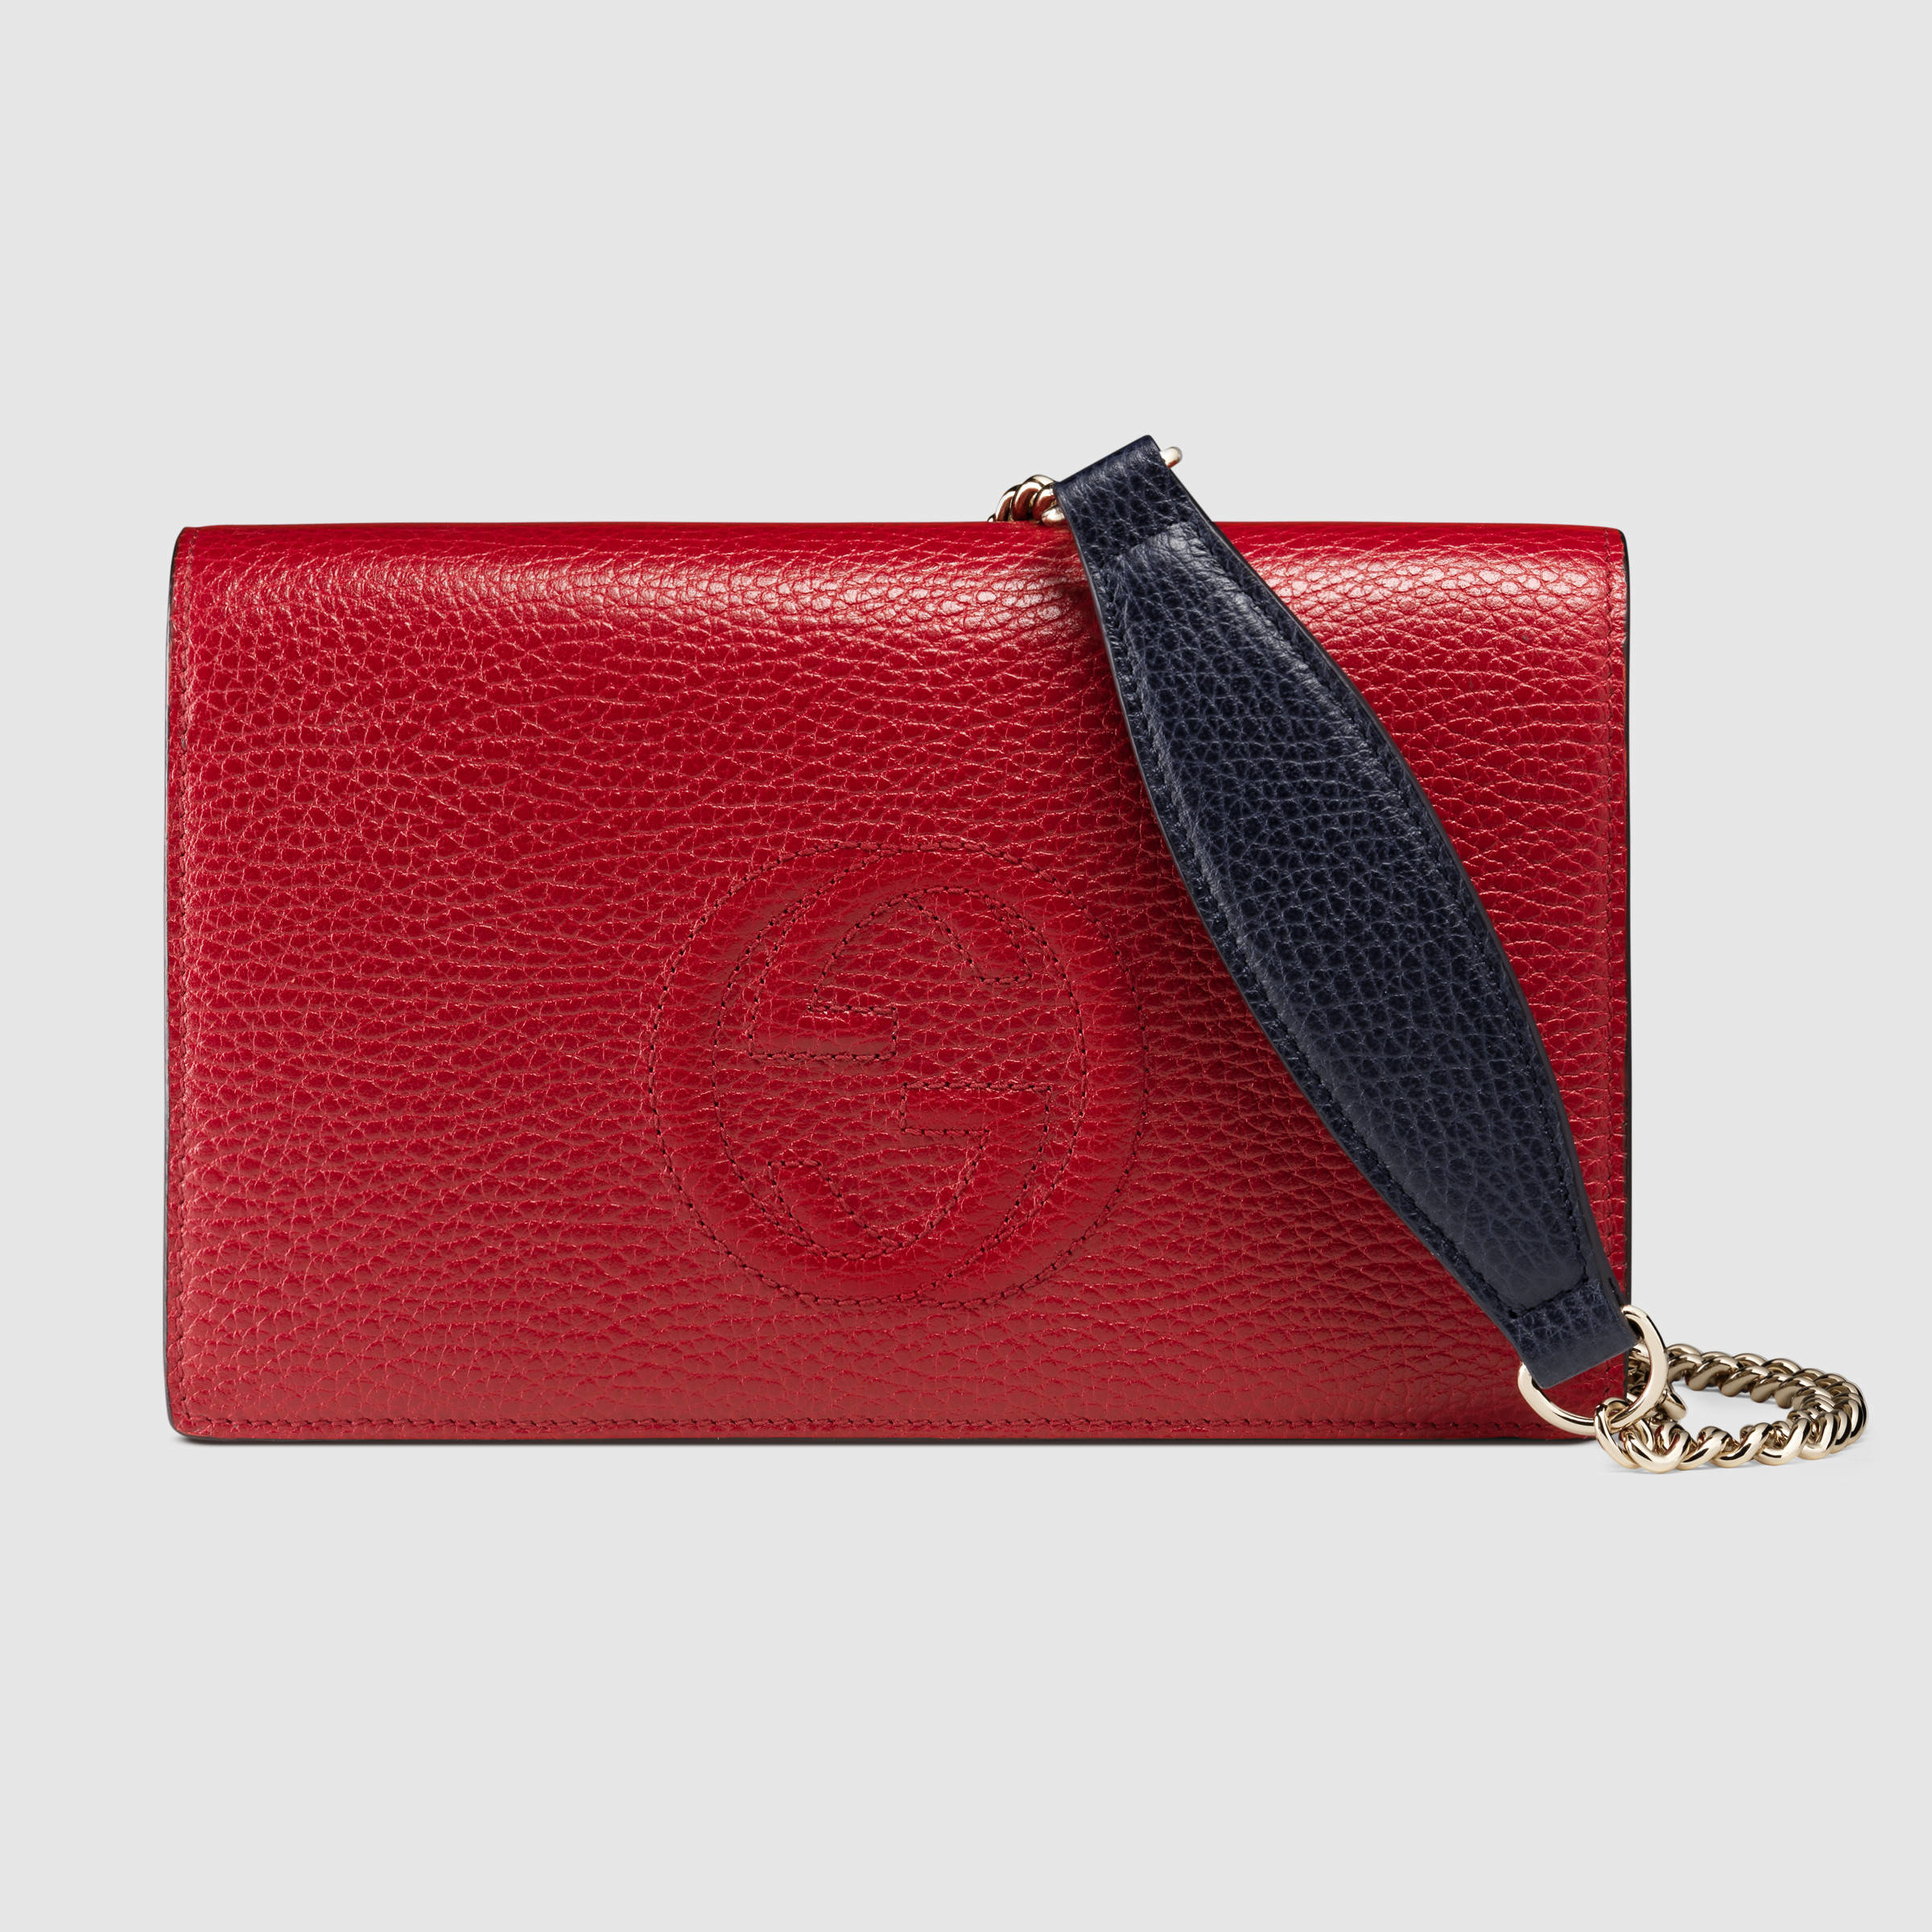 Lyst - Gucci Leather Continental Wallet in Red